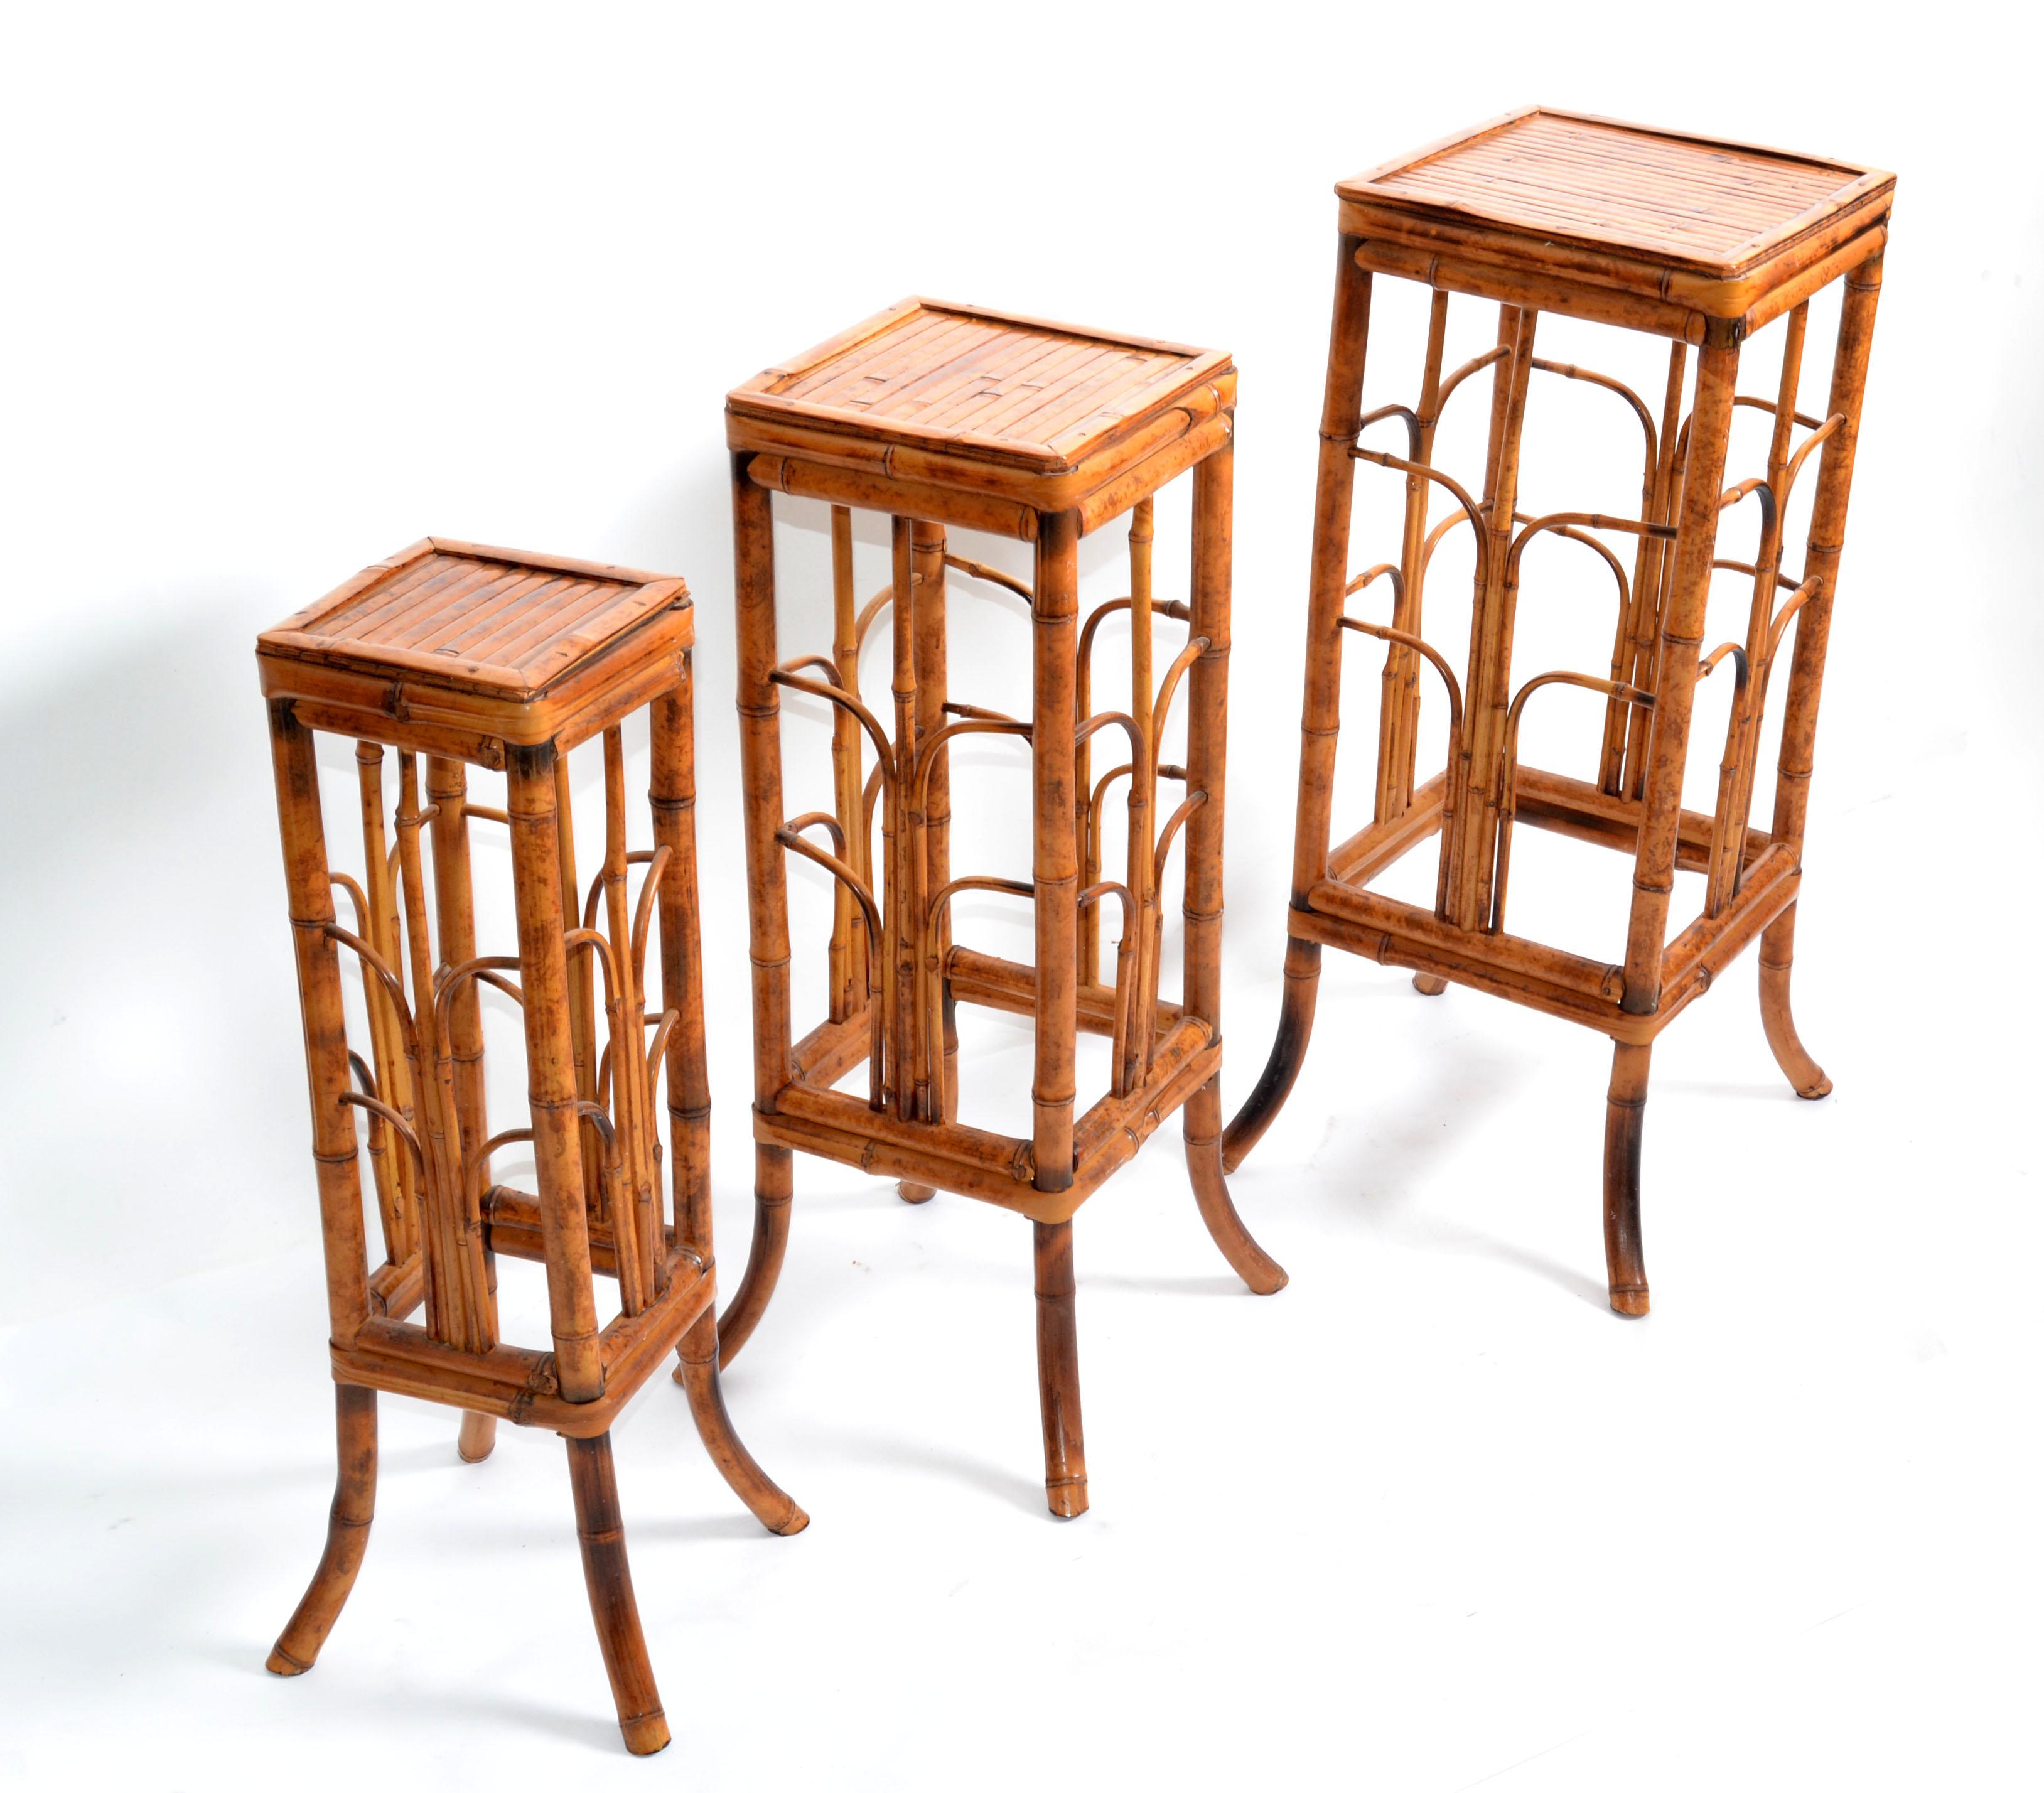 We offer a set of 3 tall Asian Modern handwoven wicker, rattan & bamboo pedestal, plant stand or end table.
Great for your Florida sunroom.
Size of each table:
12 D x 12 L x 31 inches H.
9.5 D x 9.5 L x 28.5 inches H.
7.5 D x 7.5 L x 26.5